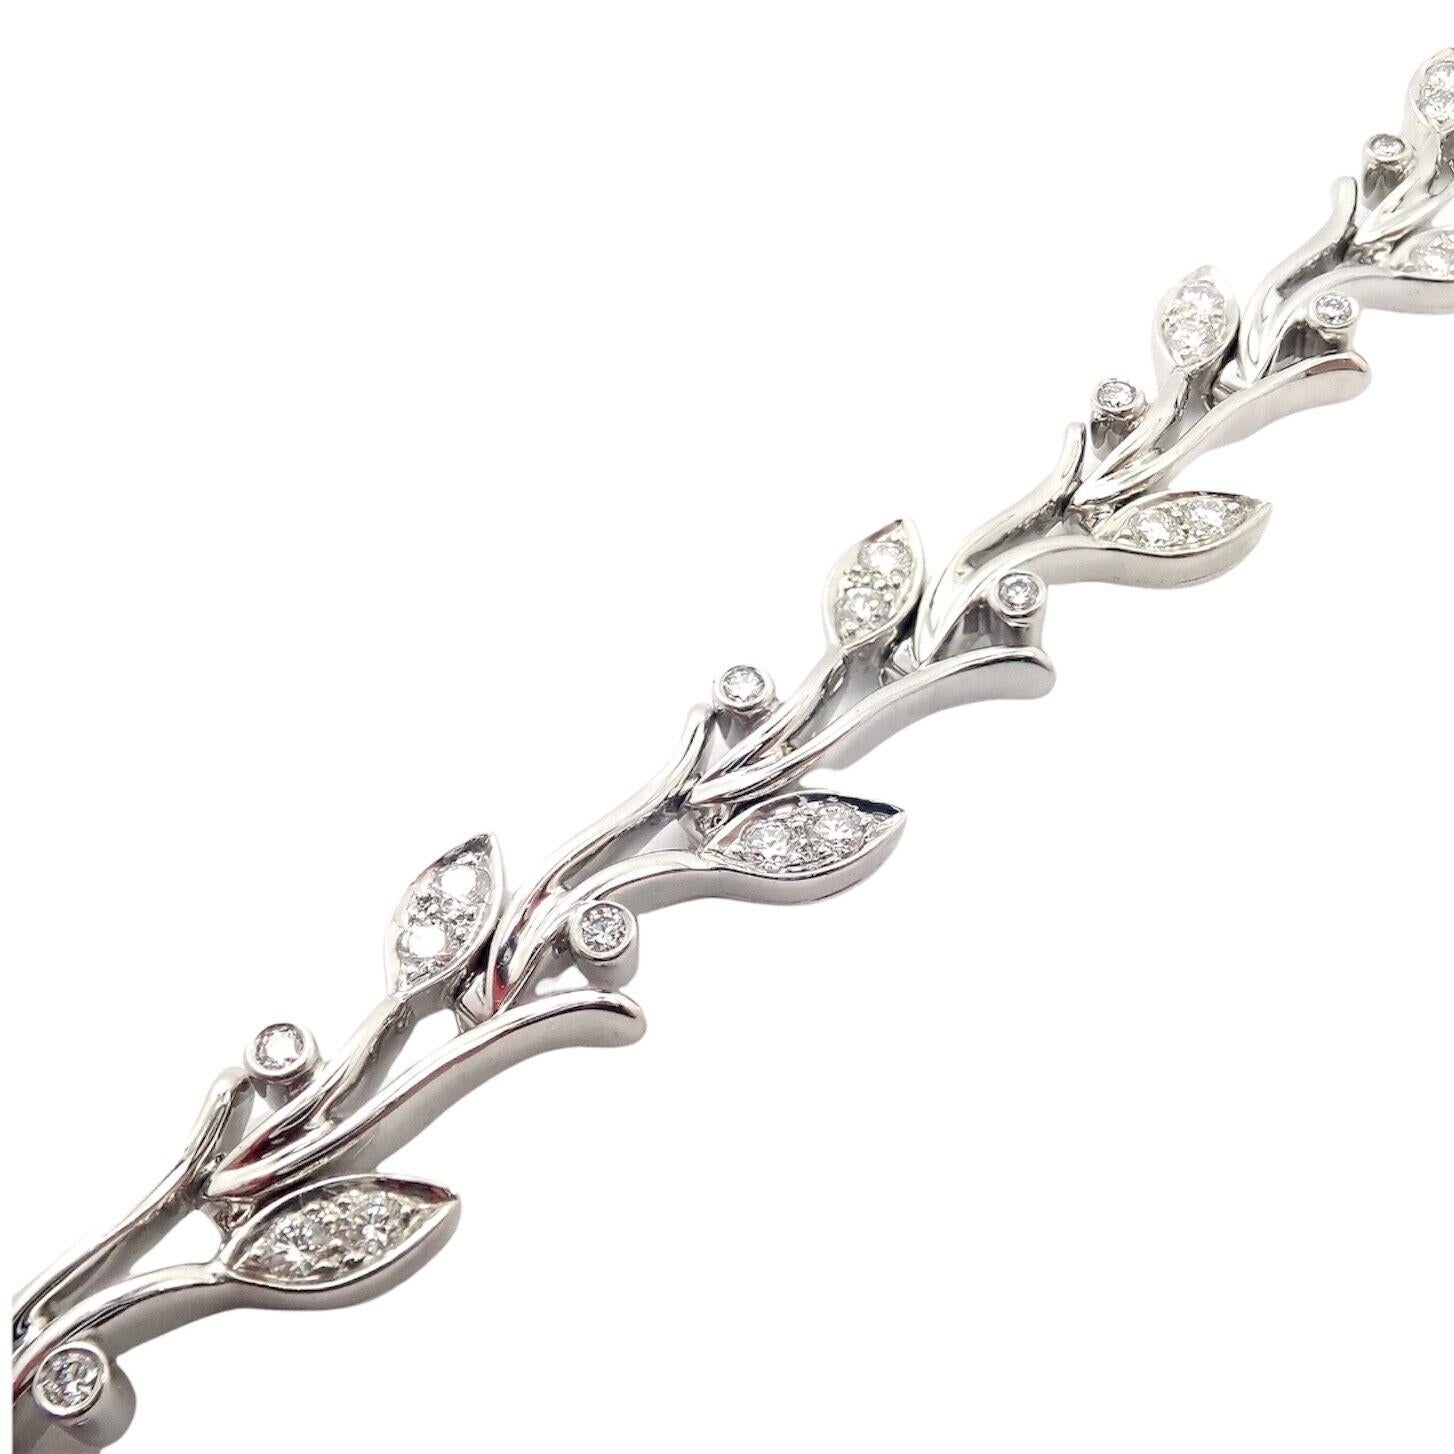 Tiffany & Co Garland 2.25ct Diamond Platinum Tennis Bracelet In Excellent Condition For Sale In Holland, PA